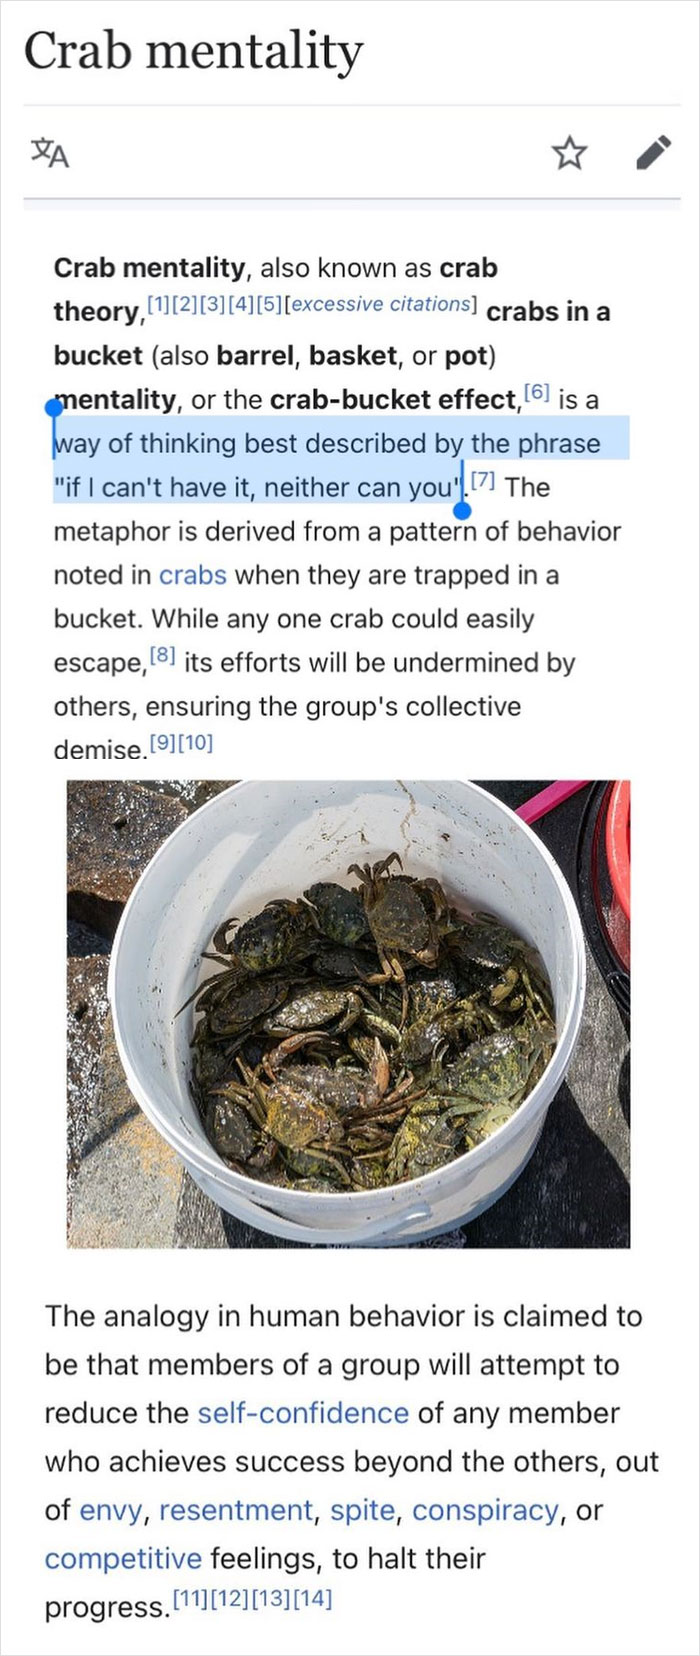 depths of wikipedia - if I can't have it, neither can you crabs